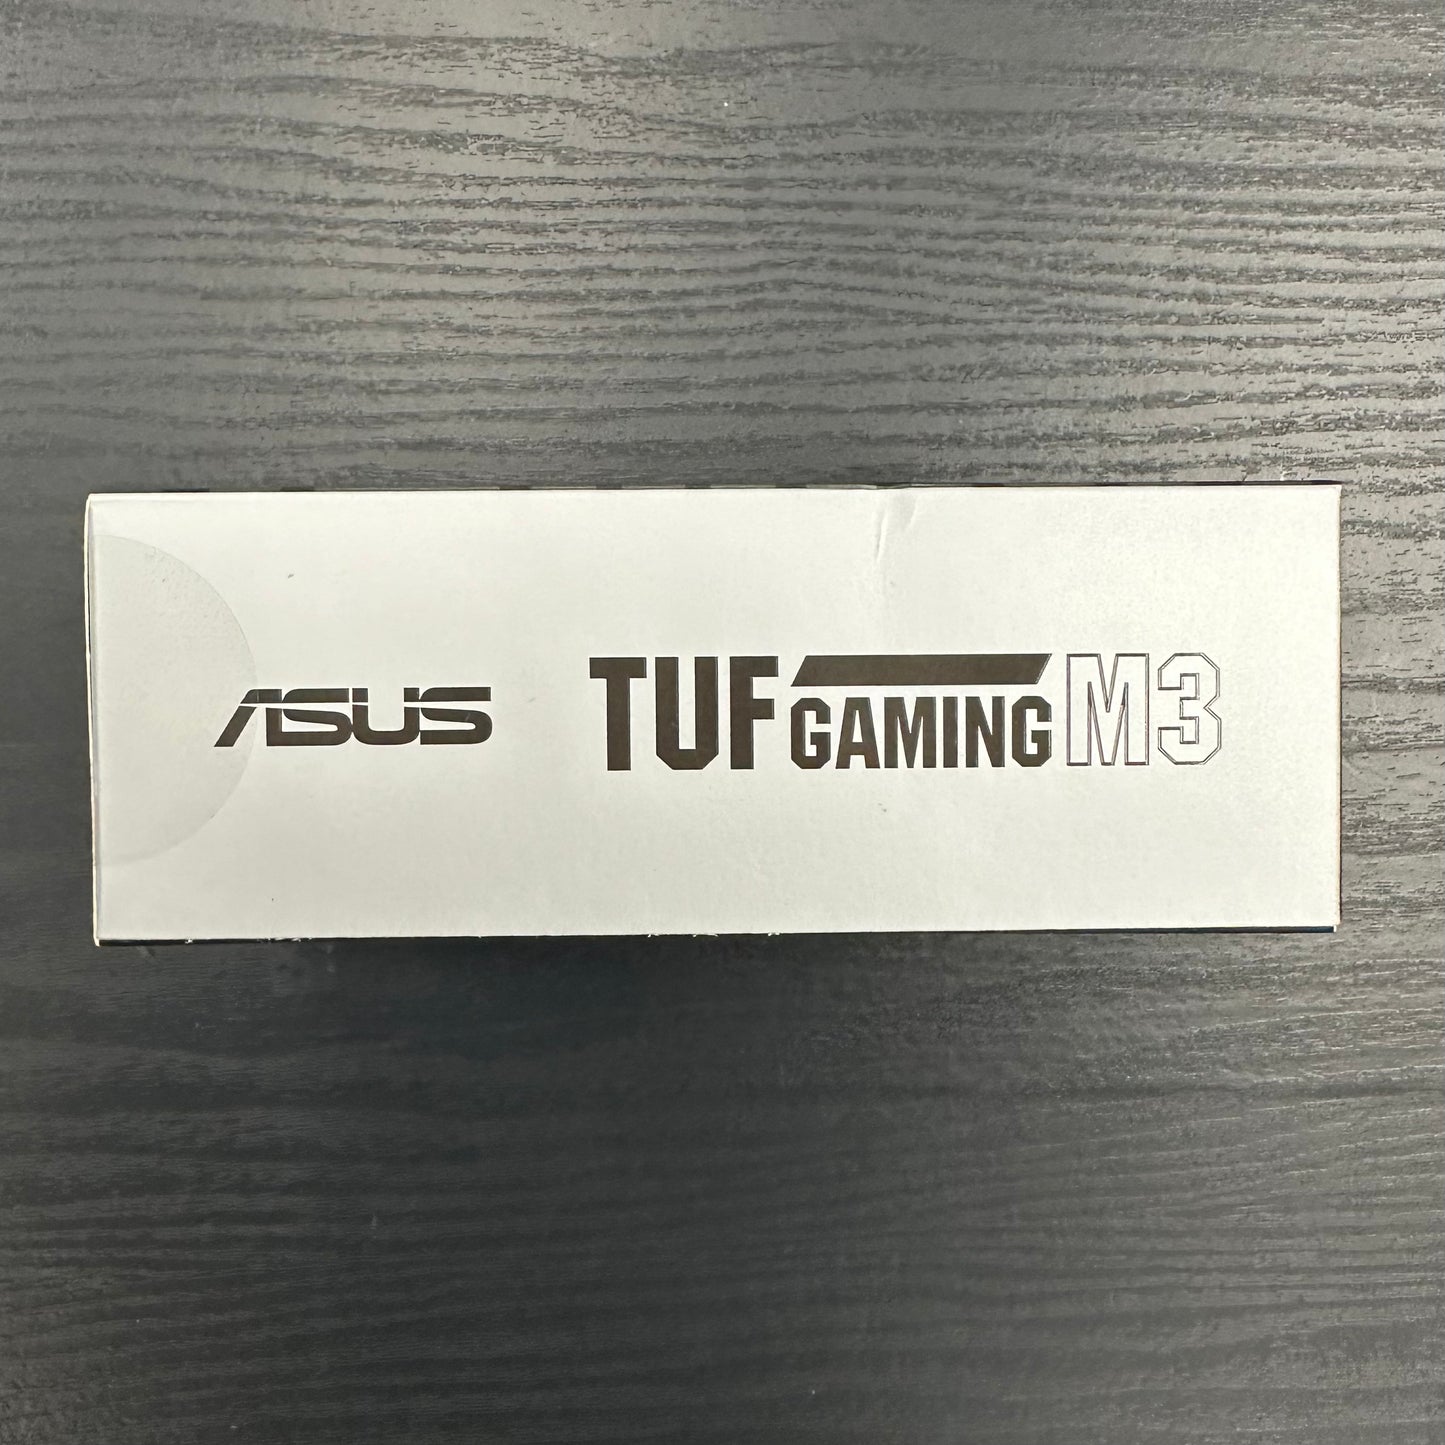 Asus TUF Gaming M3 Wired Mouse